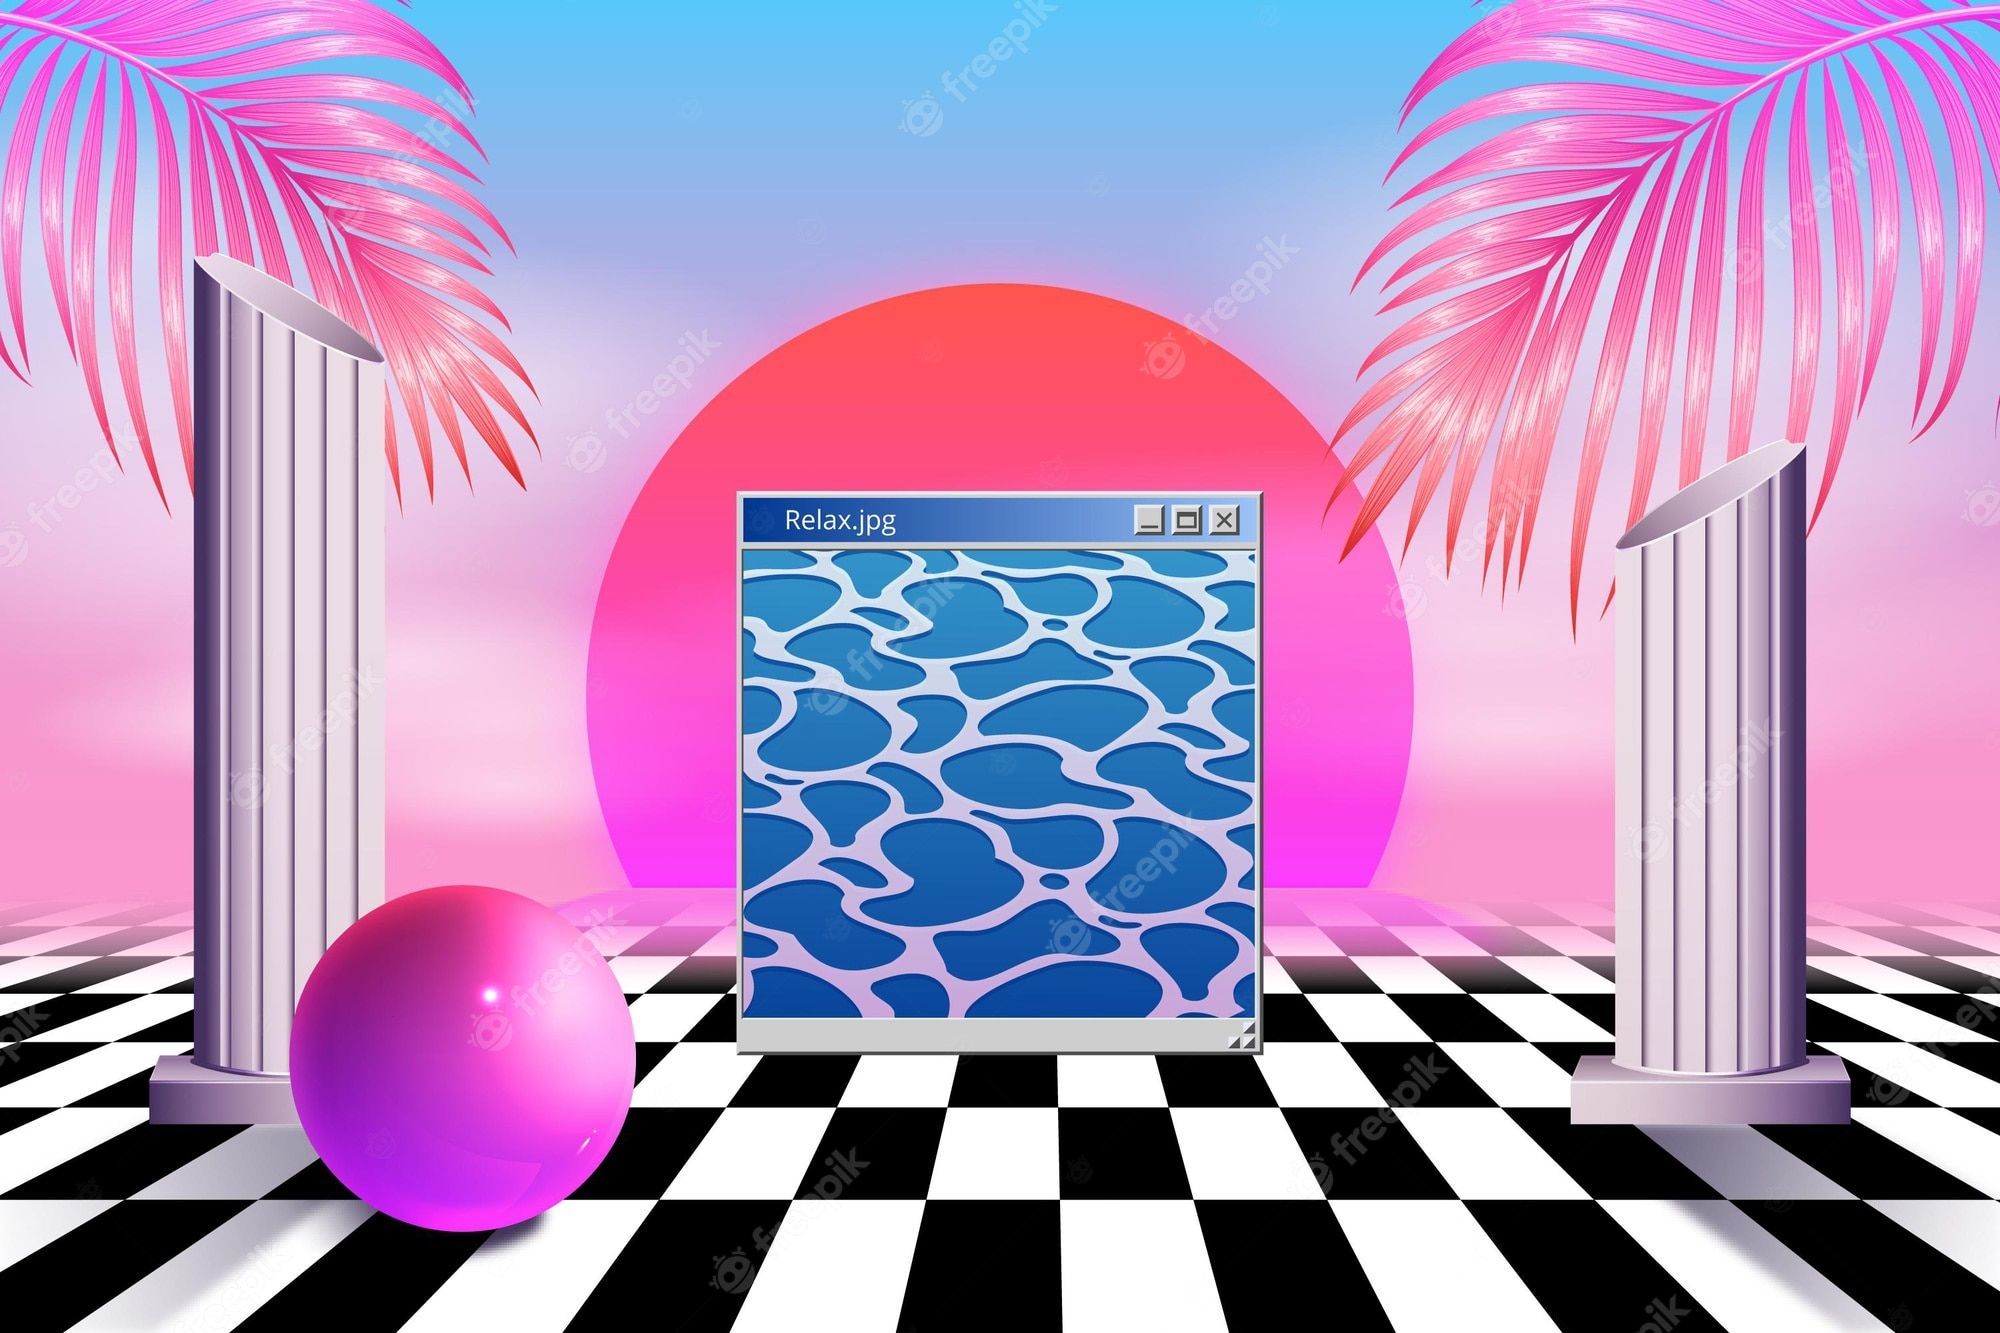 Vaporwave image with a pool on a checkered floor - Dark vaporwave, synthwave